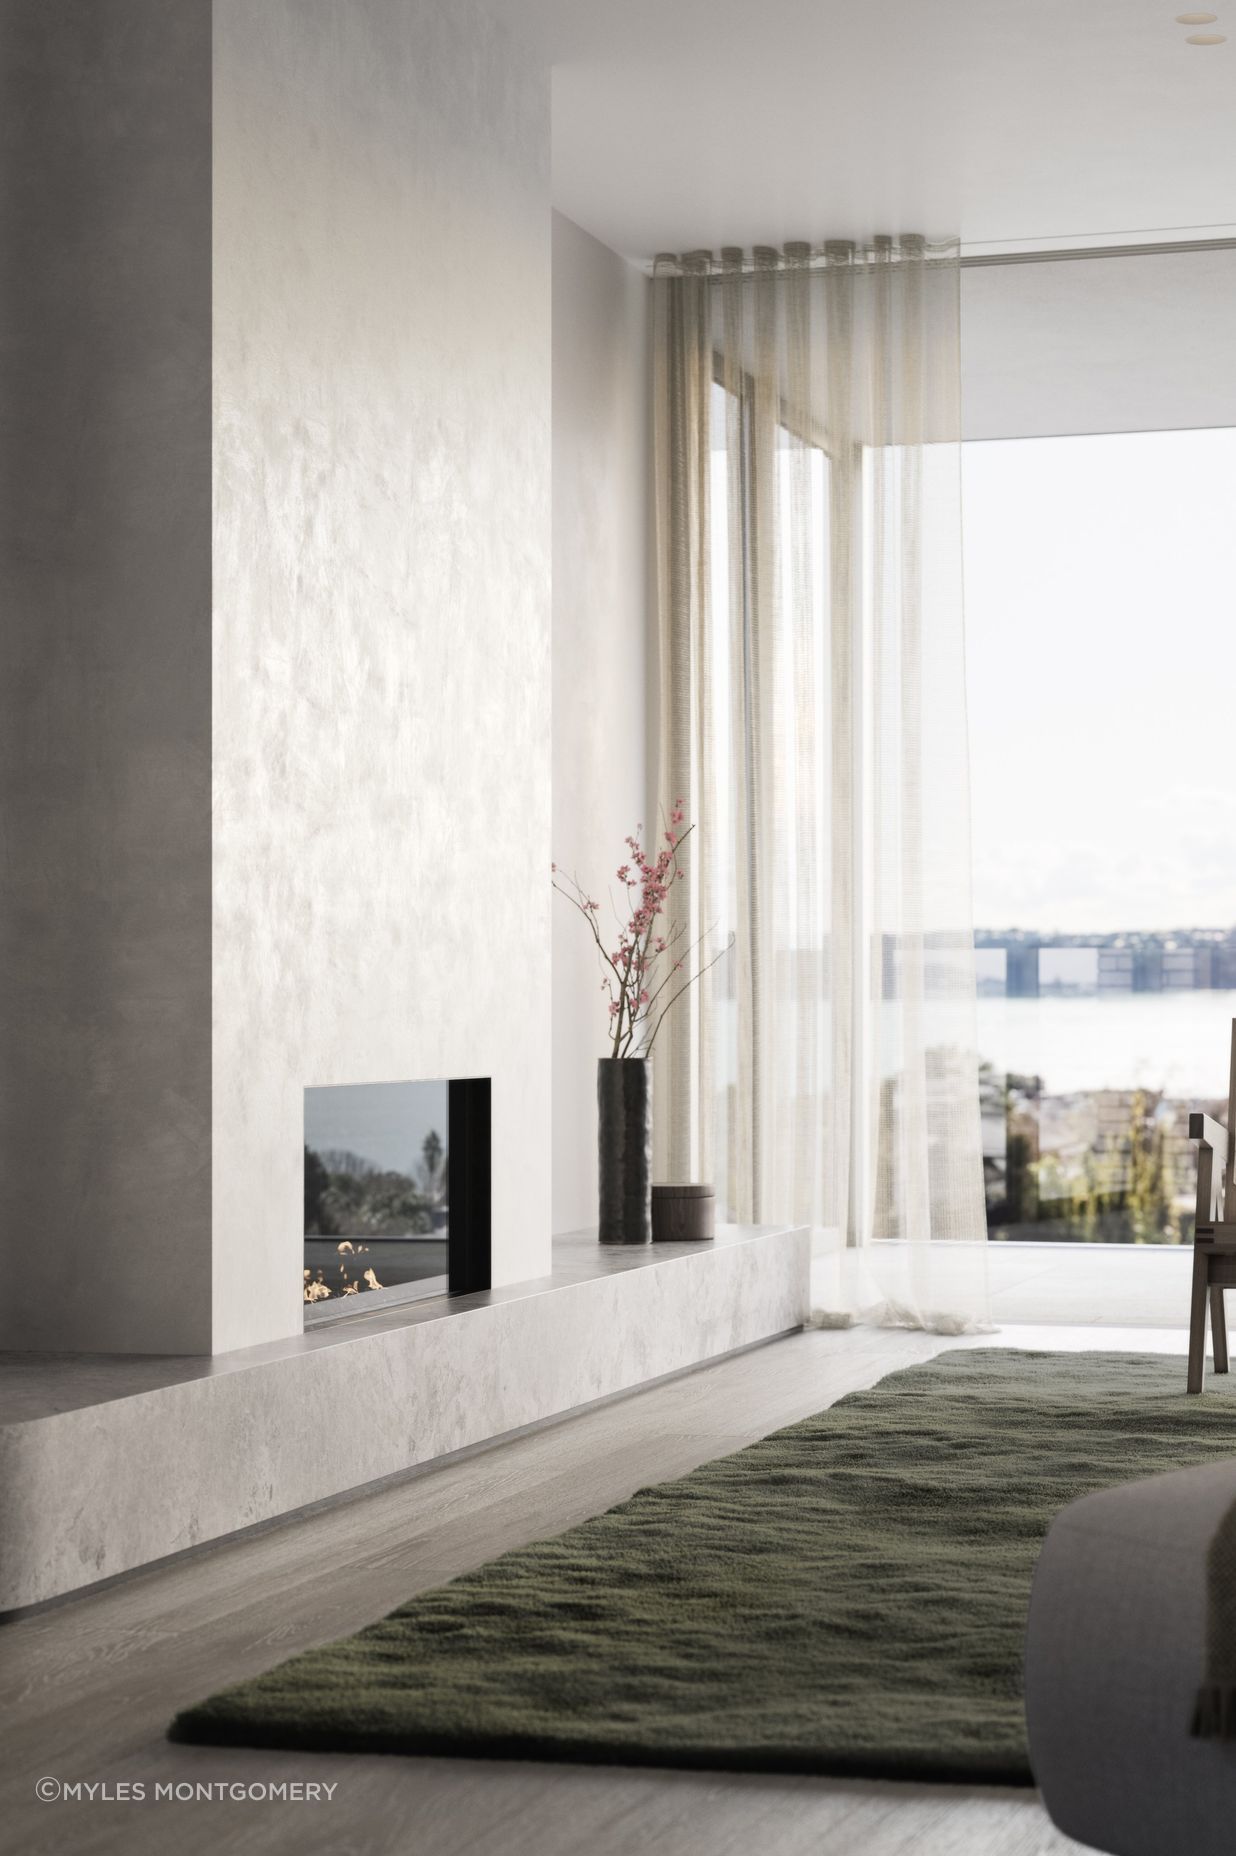 Fireplaces feature in each apartment as a centrepiece of the living spaces.